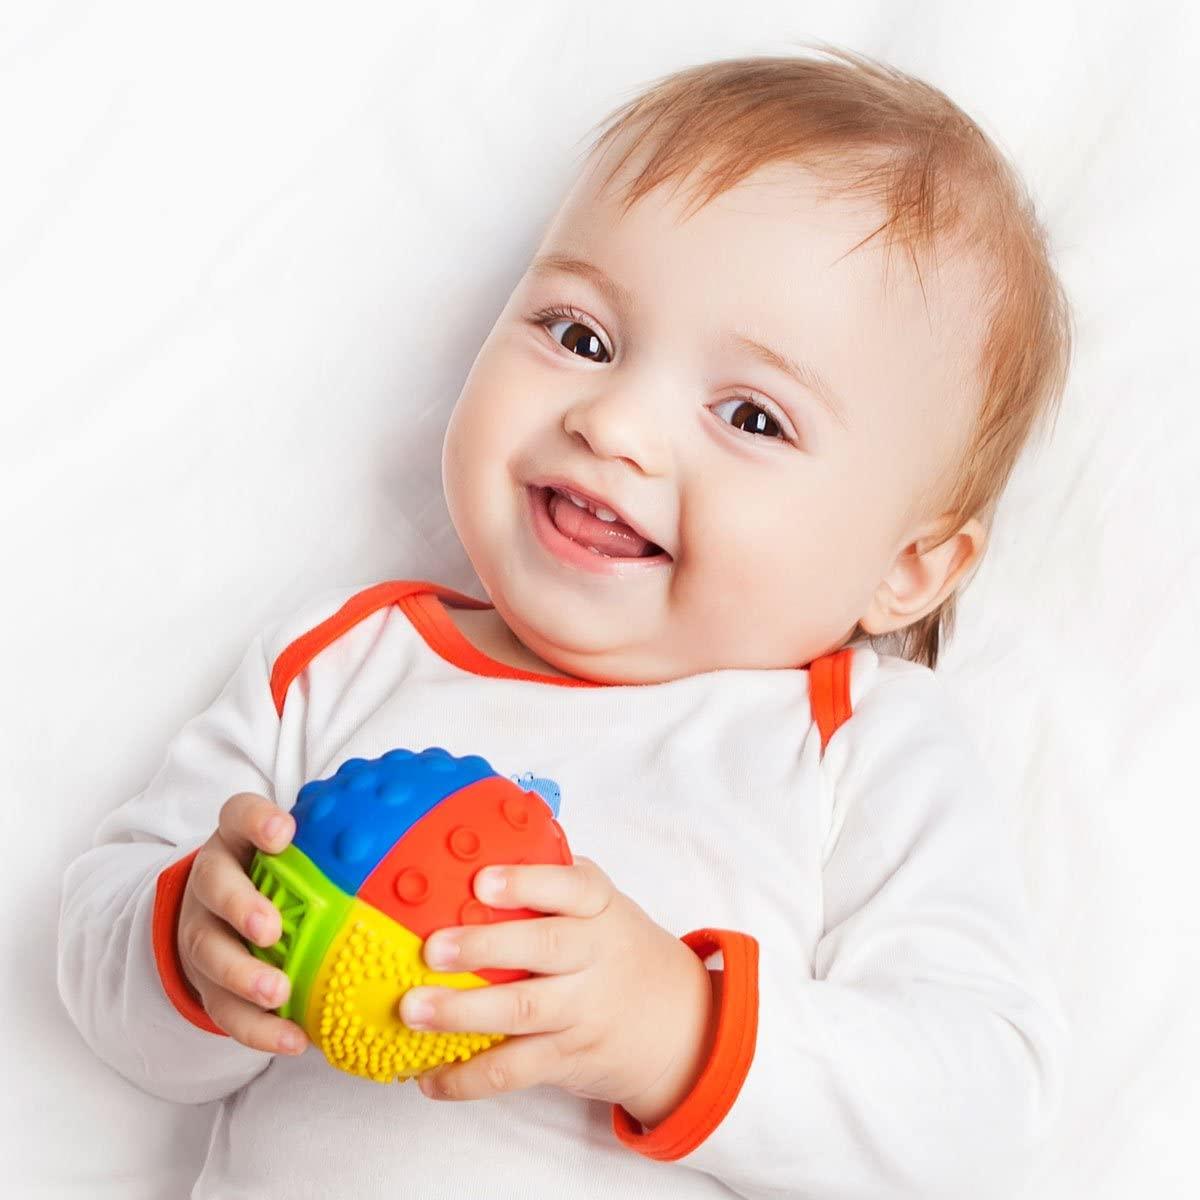 Baby lying down and holding a colourful ball